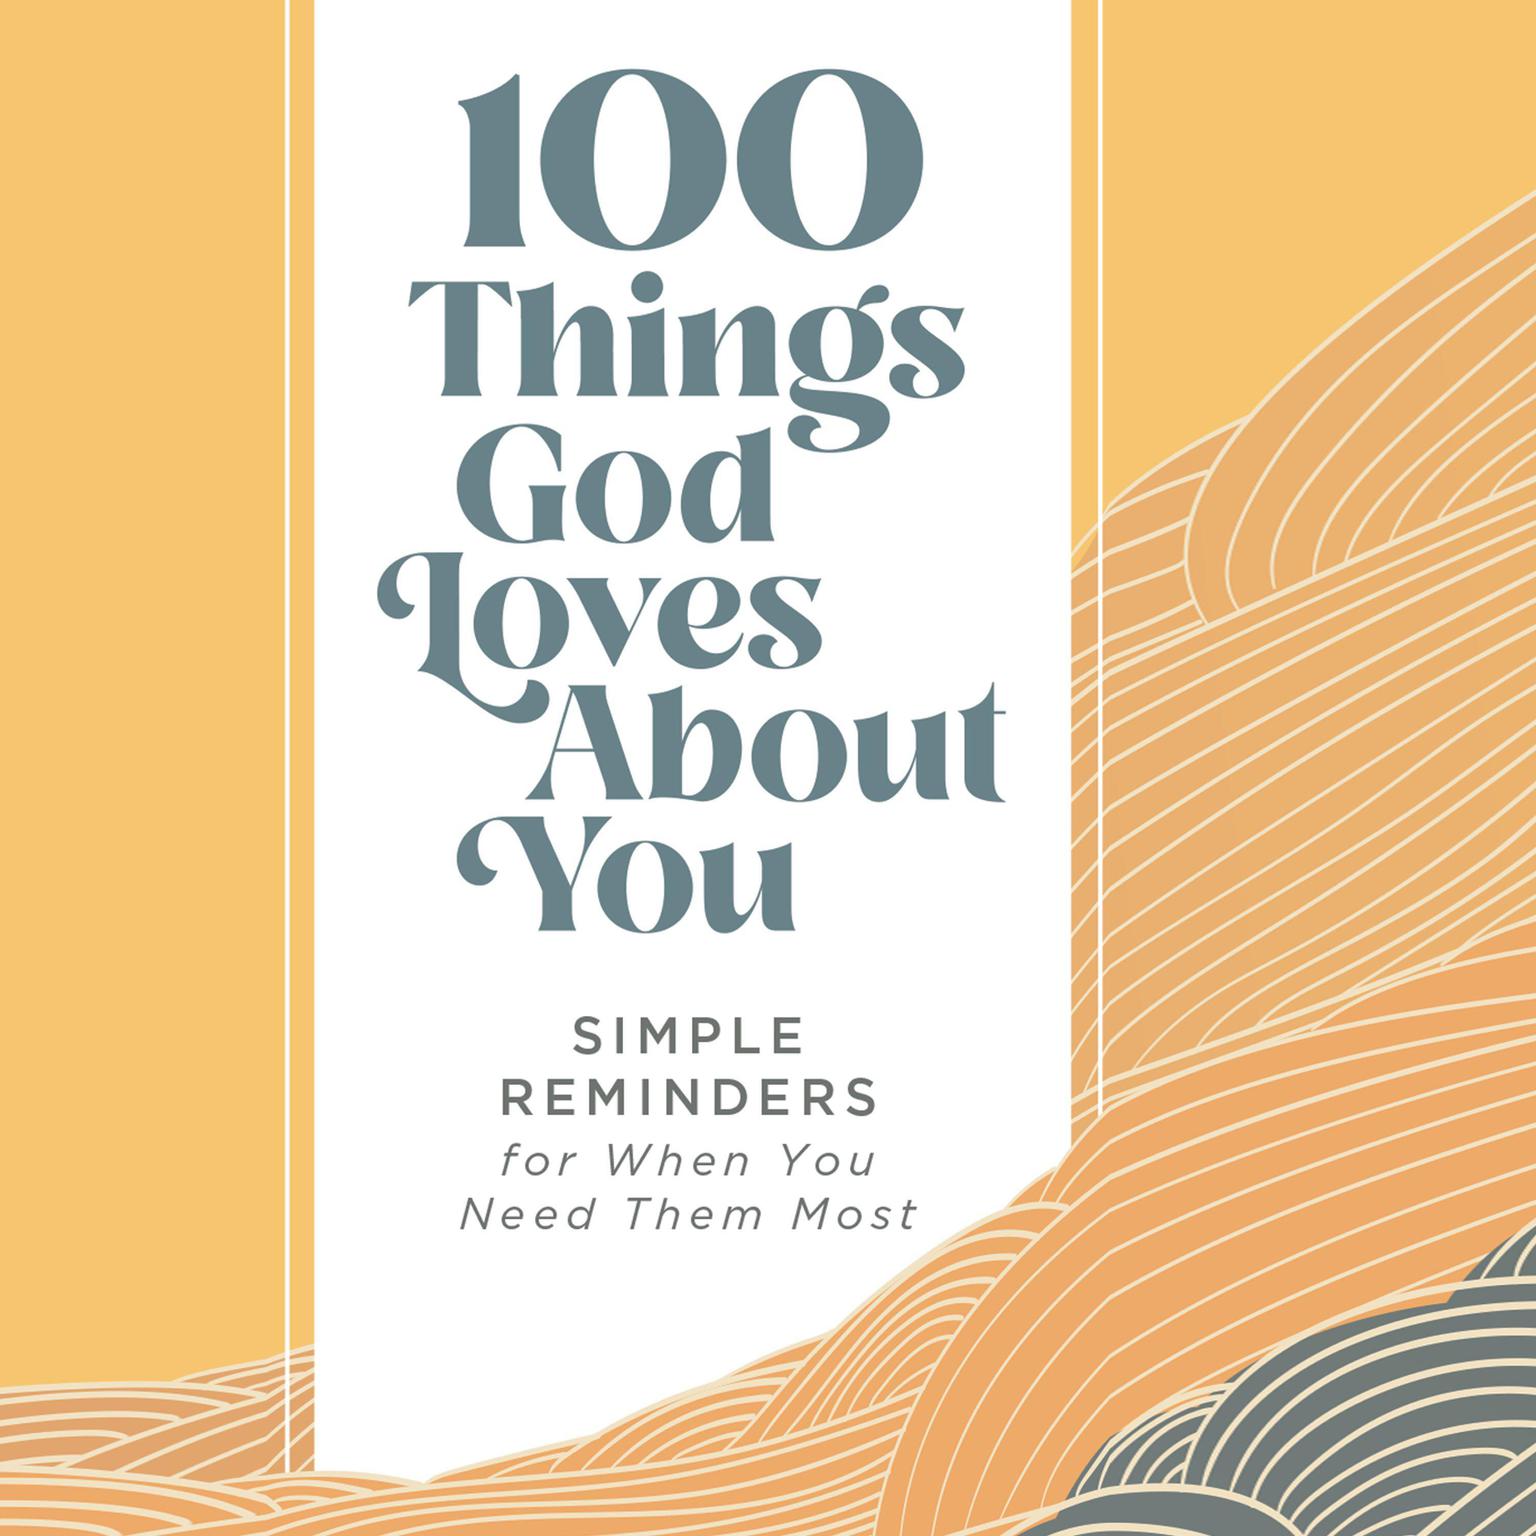 100 Things God Loves About You: Simple Reminders for When You Need Them Most Audiobook, by Zondervan